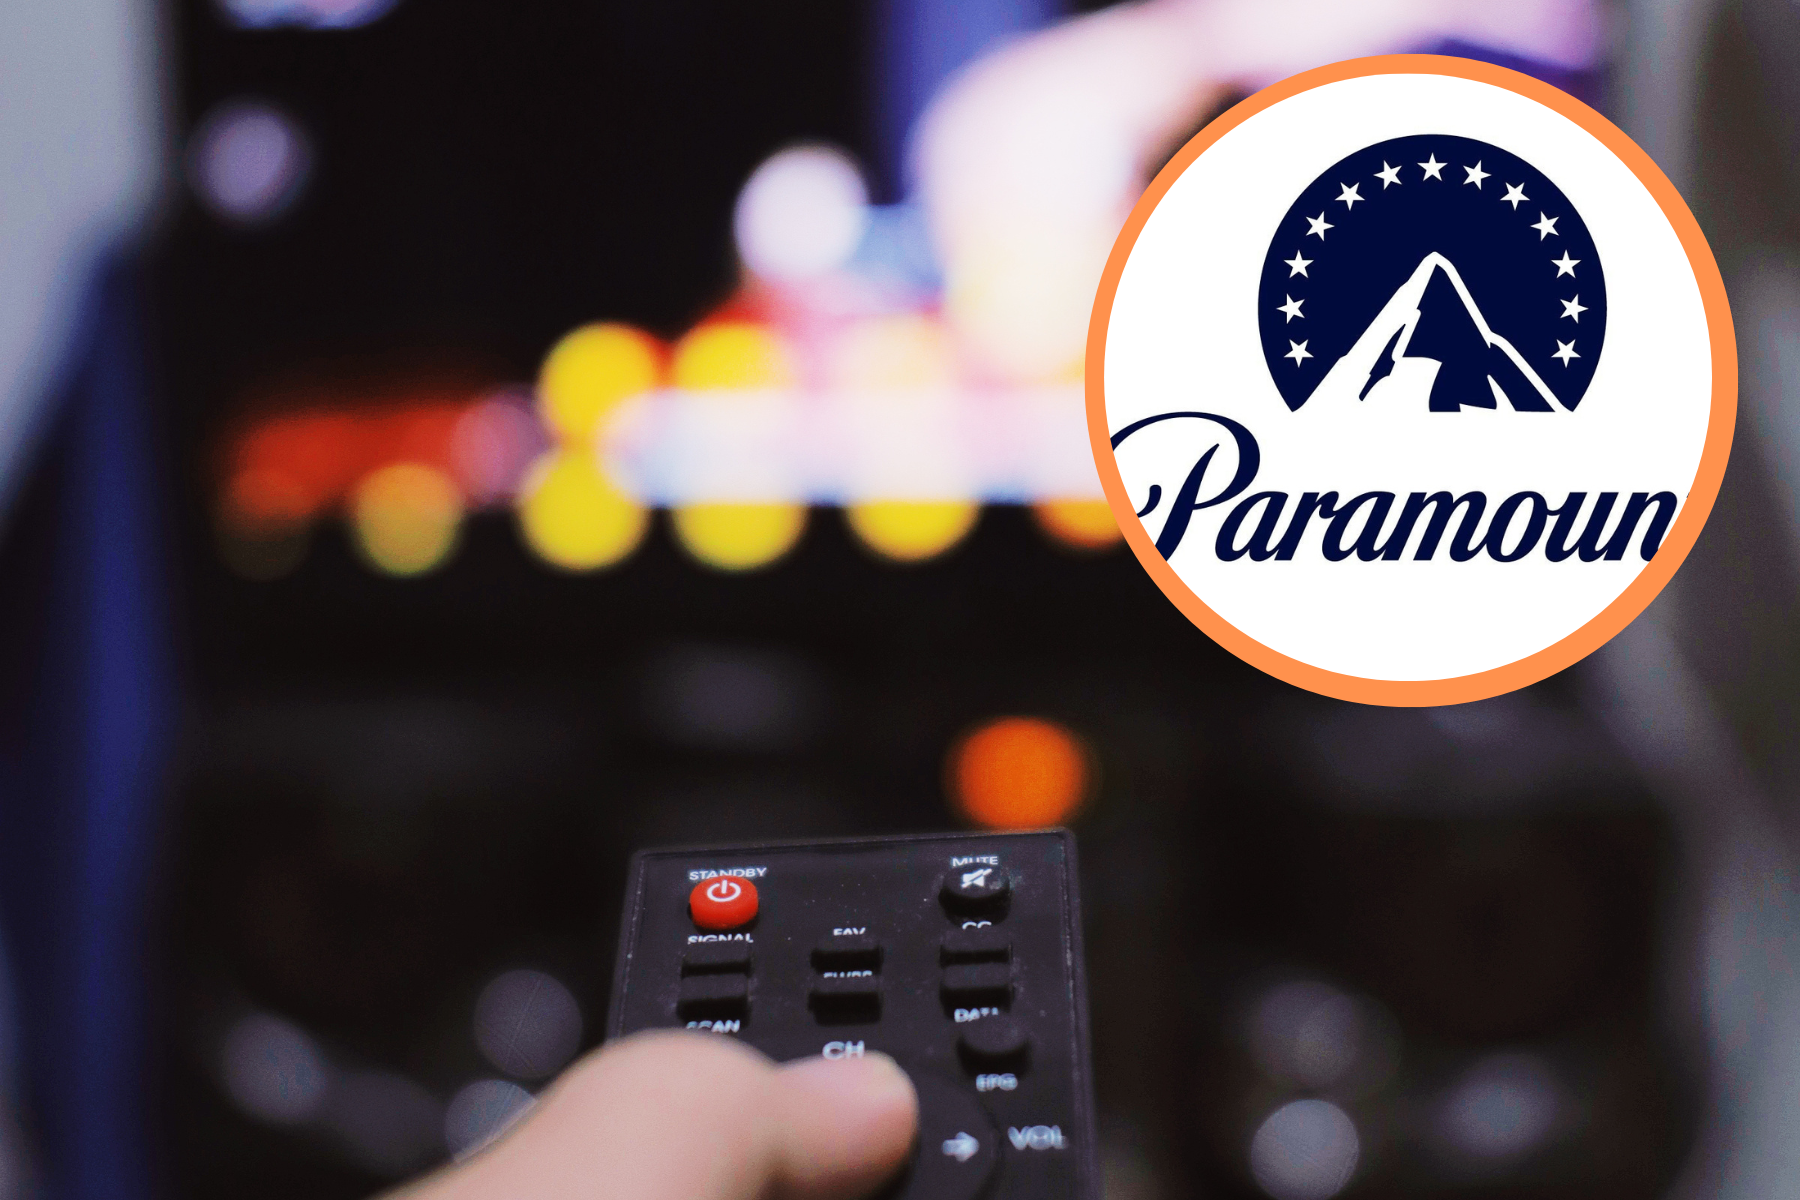 Get Paramount+ for free with Sky Cinema: How to sign up